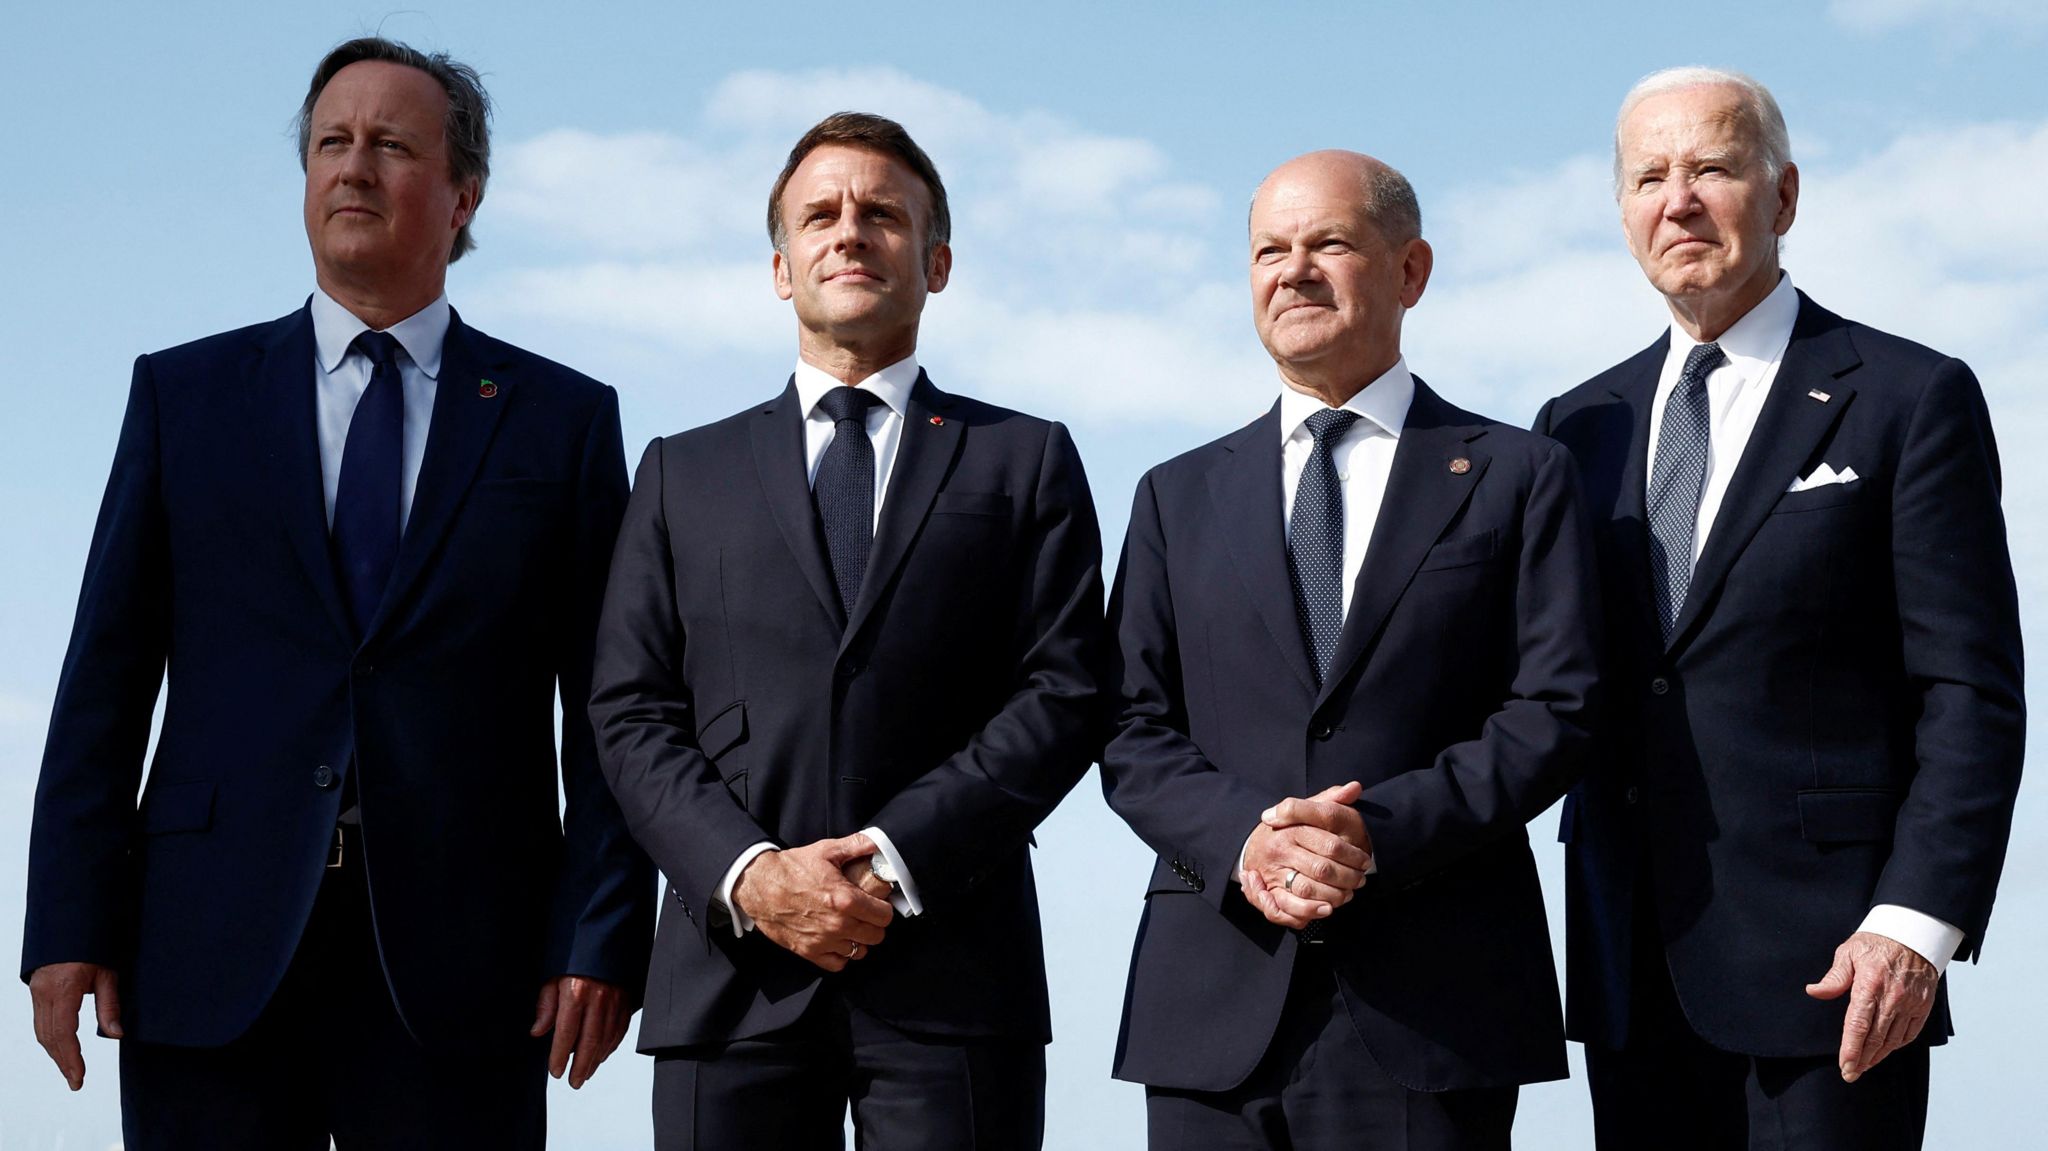 Britain's Foreign Secretary David Cameron, French President Emmanuel Macron, German Chancellor Olaf Scholz and U.S. President Joe Biden attend the international ceremony marking the 80th anniversary of the 1944 D-Day landings and the liberation of western Europe from Nazi Germany occupation, at Omaha Beach in Saint-Laurent-sur-Mer,